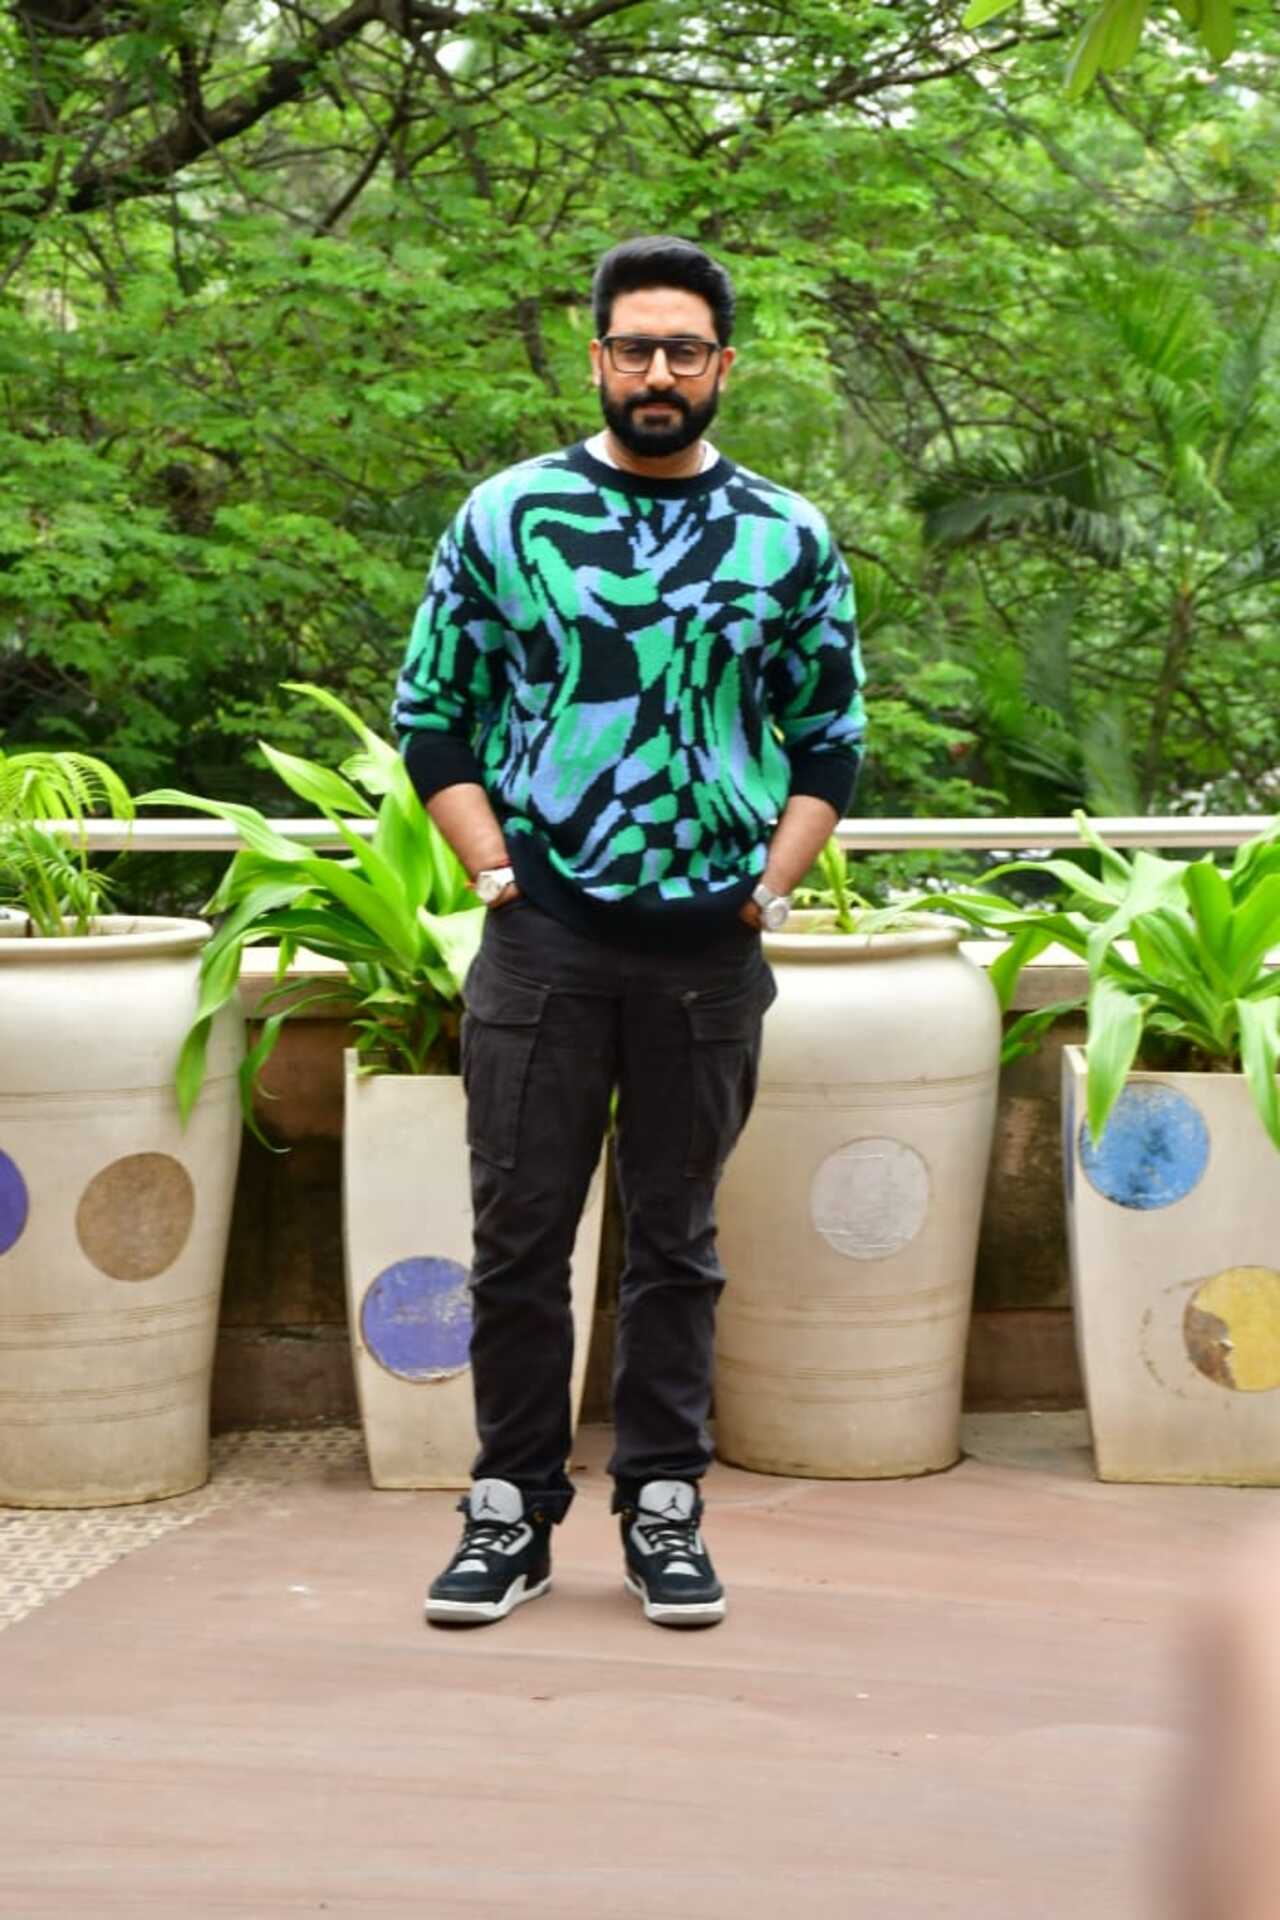 Abhishek Bachchan was out in the city for Ghoomer's promotions